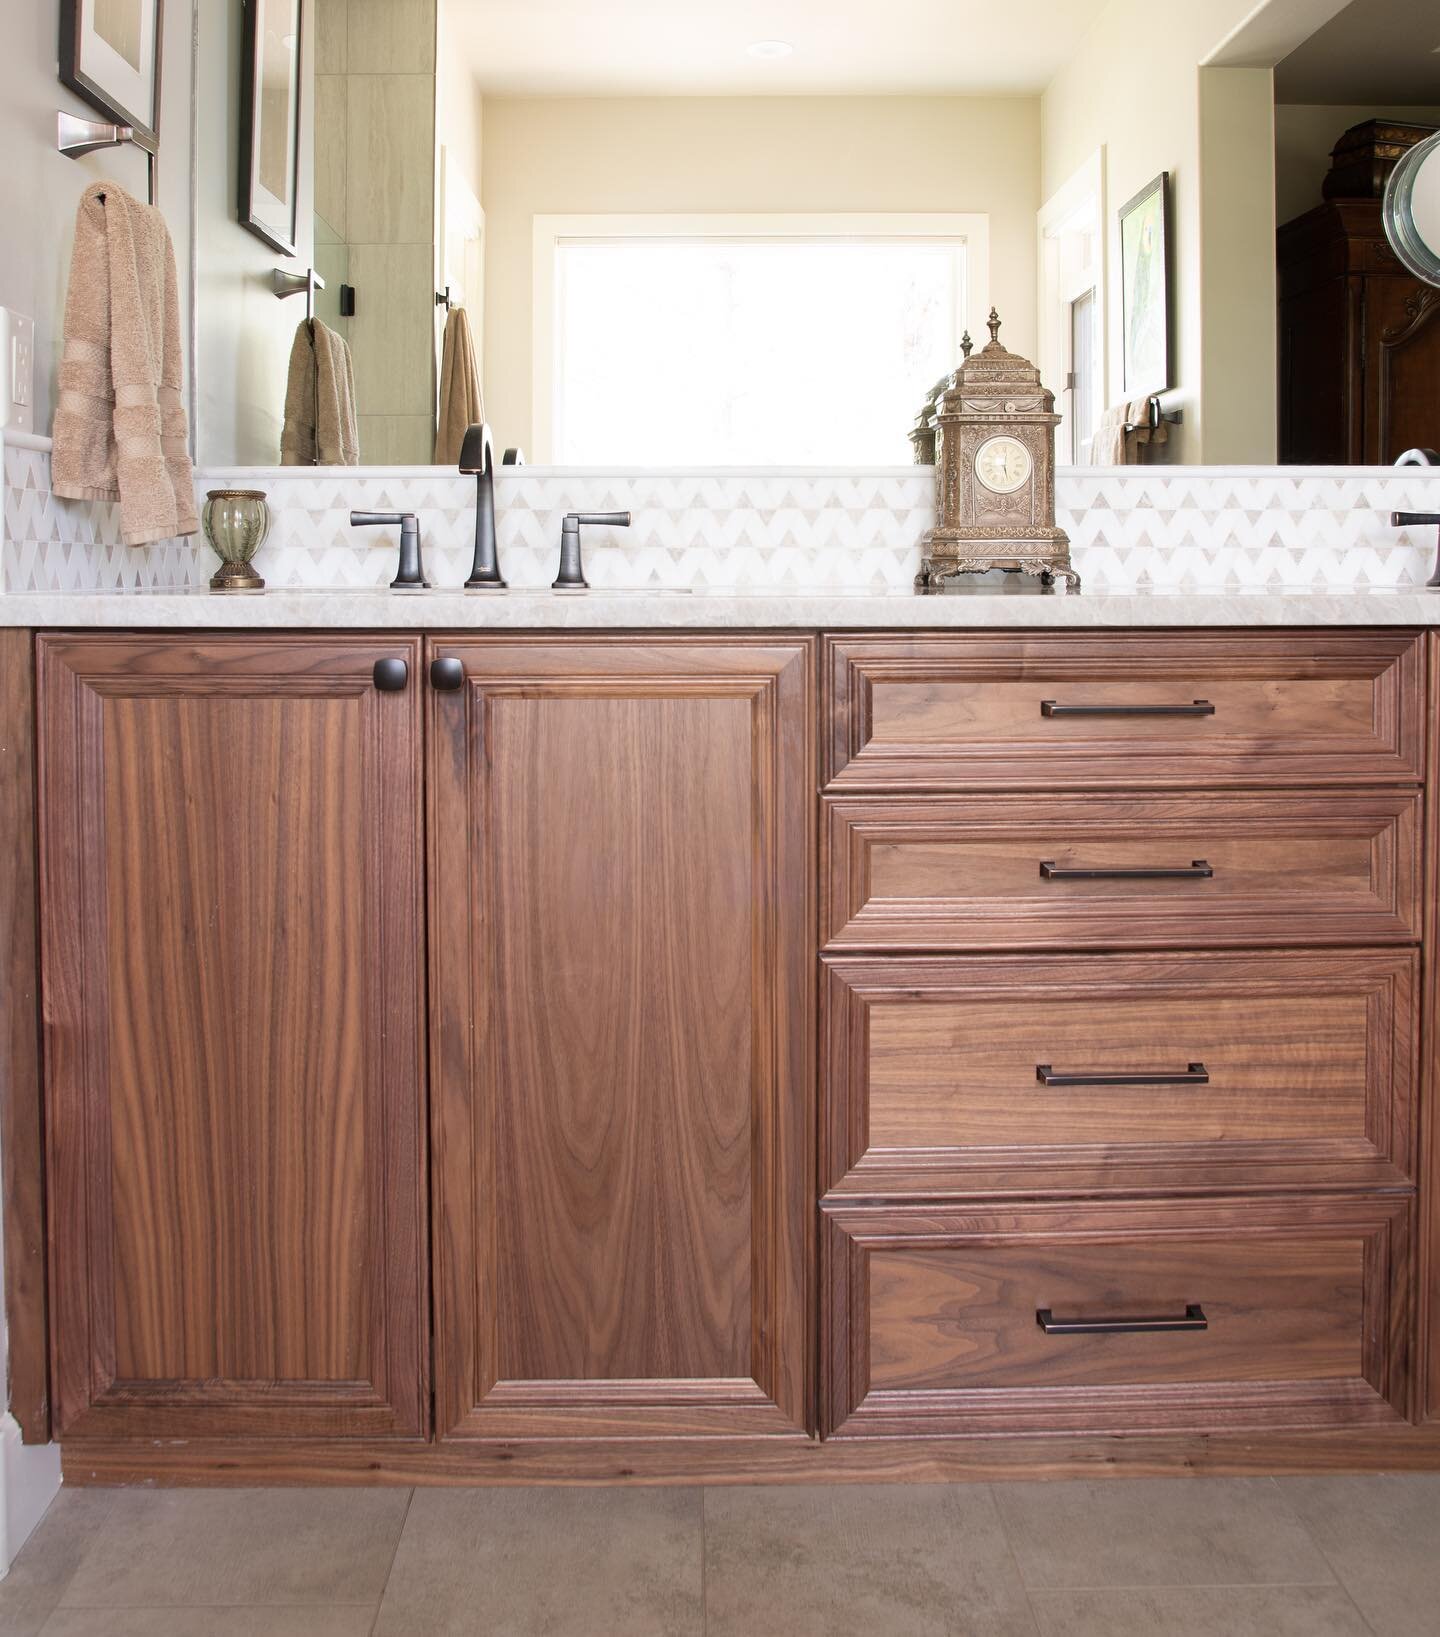 Keeping things more traditional in this master bathroom! #northcabinetco